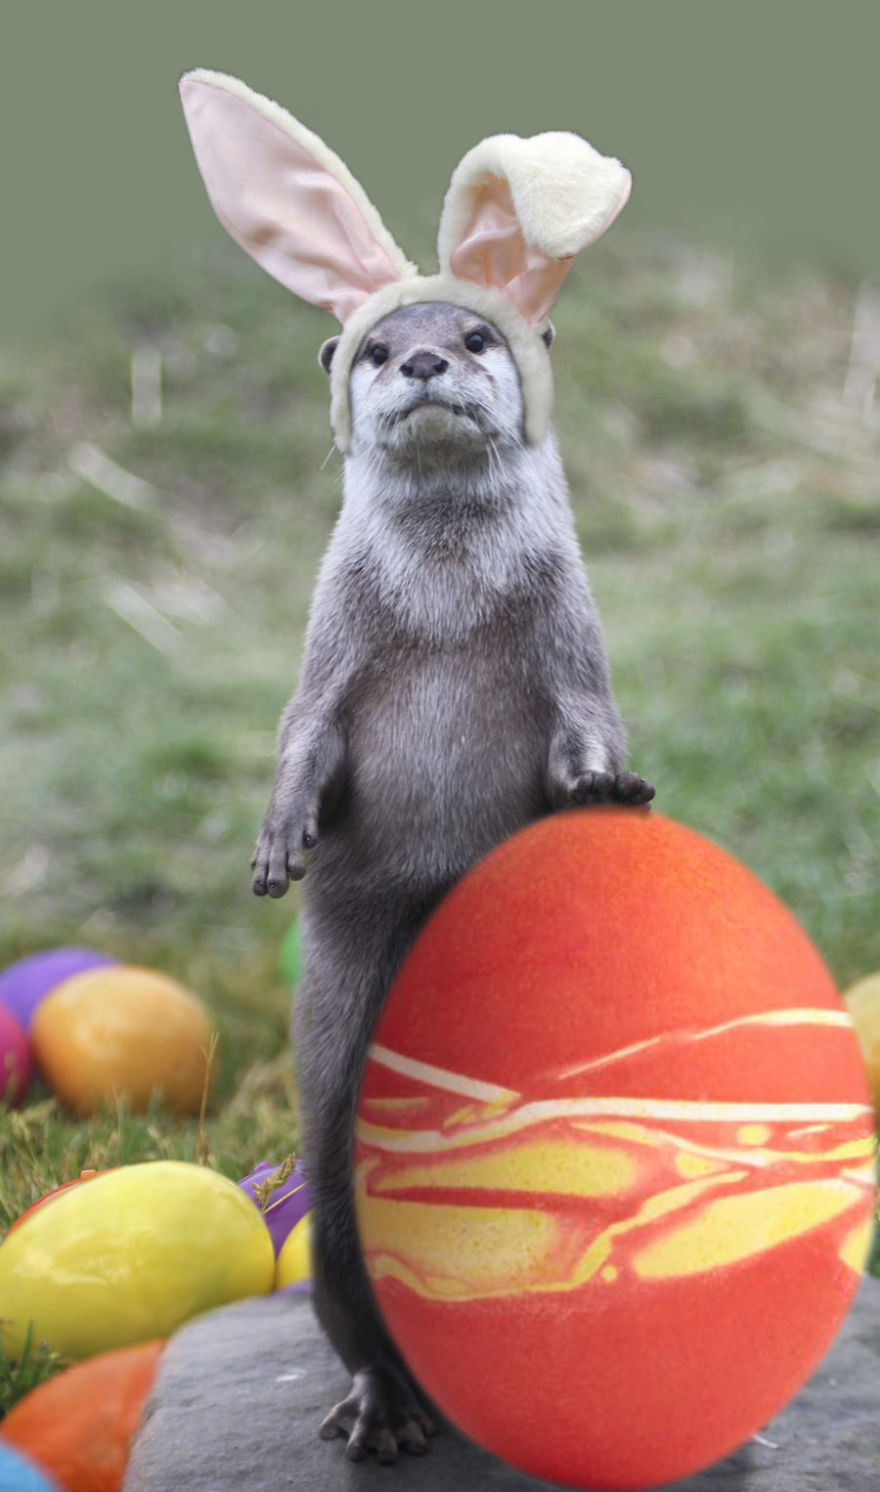 The Otter Bunny